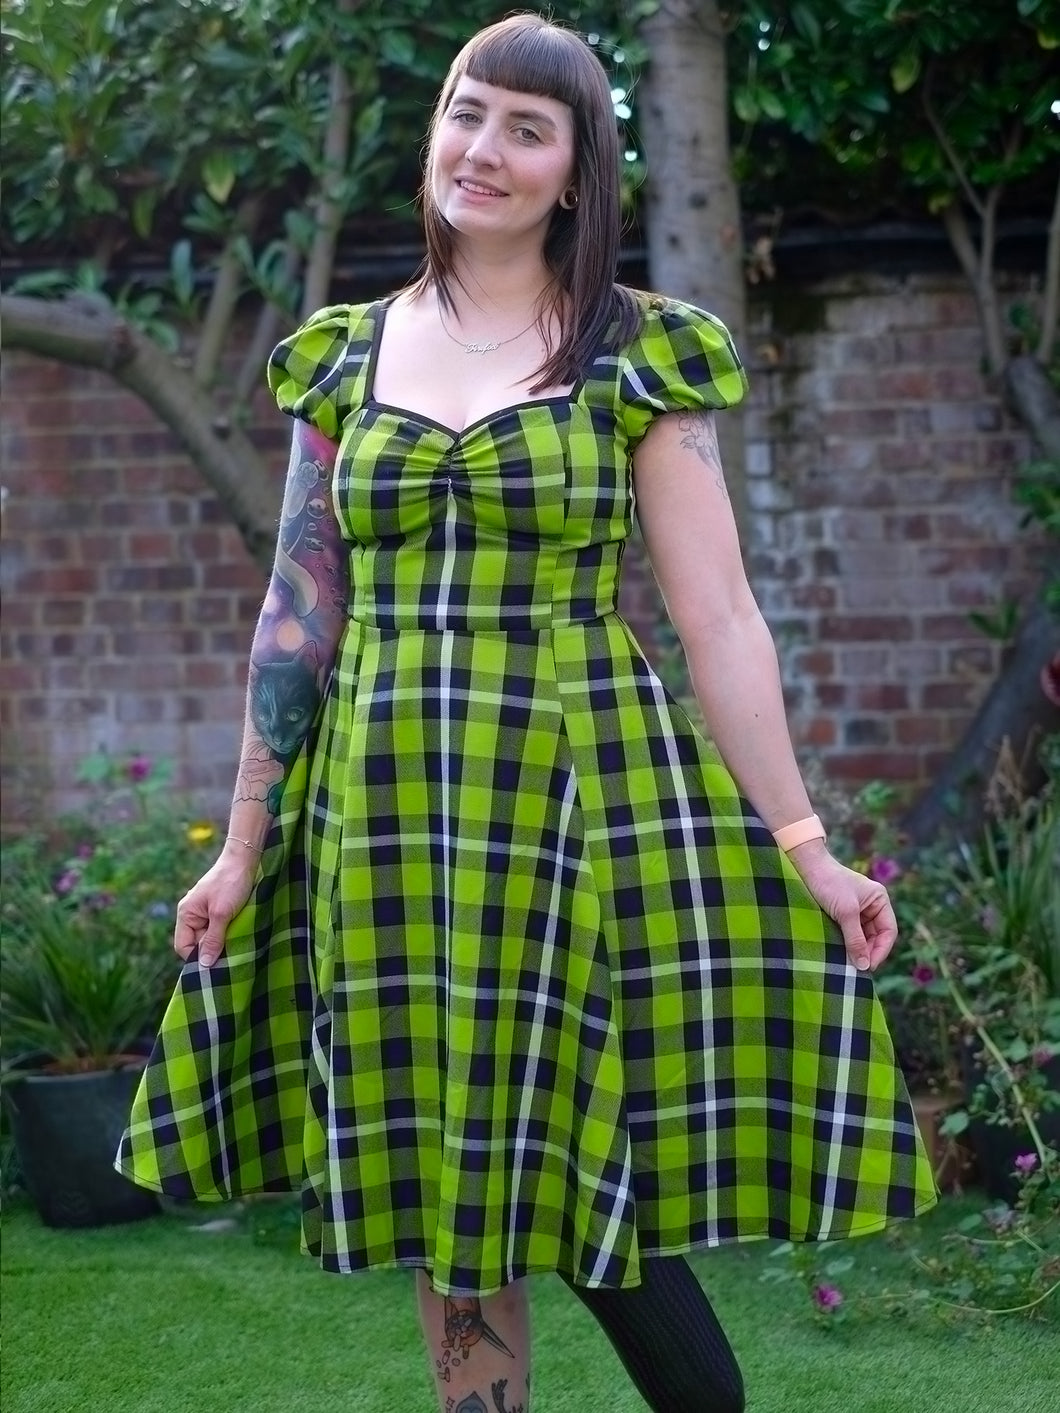 Collectif for Suzie's Bombshell Boutique Mimi Frogs Breath check tartan plaid retro vintage pin-up pinup rockabilly swing dress.